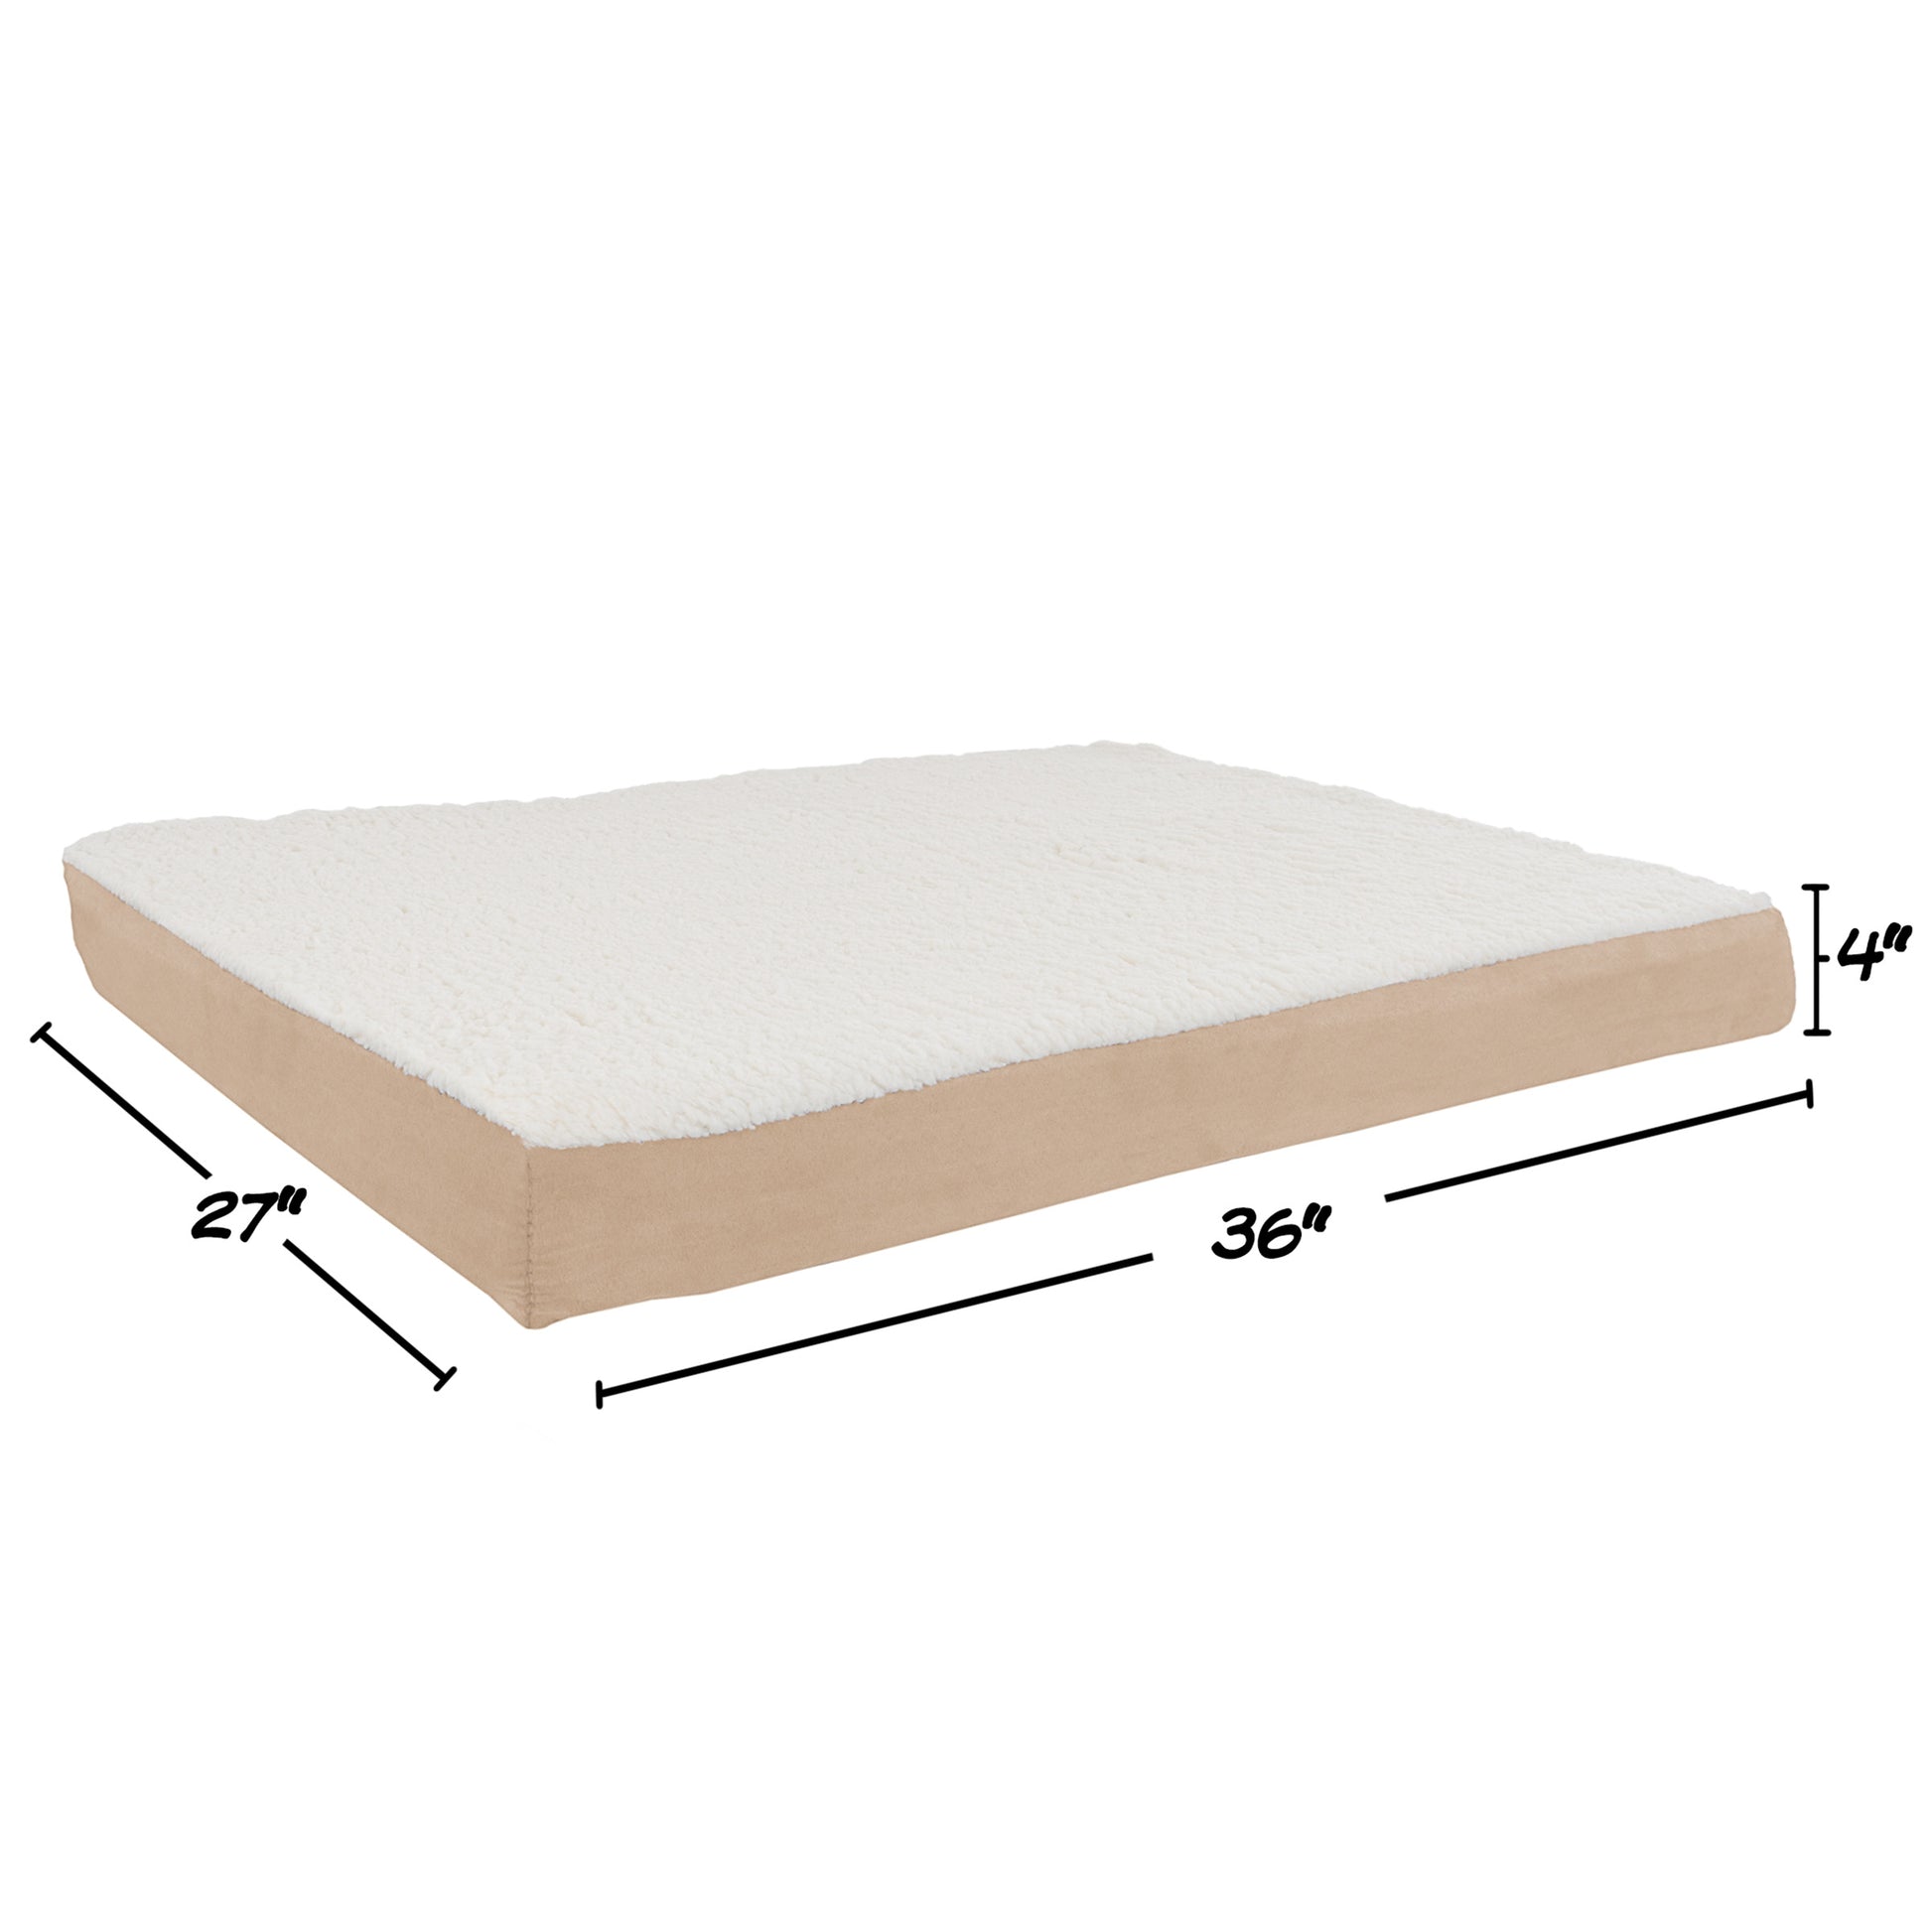 Orthopedic Dog Bed - 2-layer Memory Foam Crate Mat With Machine